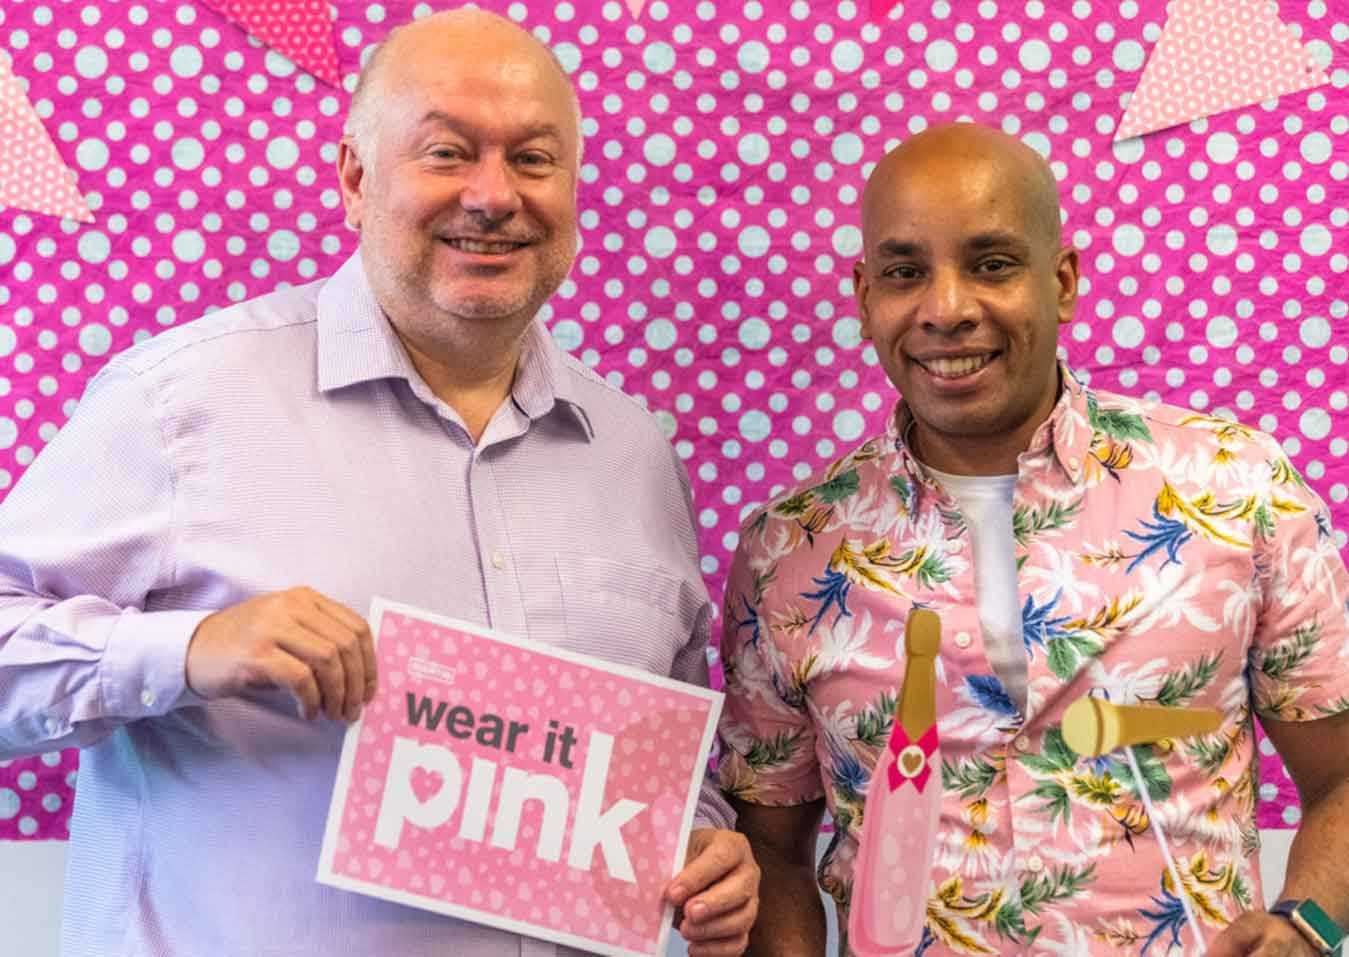 Chris Carswell and Karl Tulloch Wearing Pink